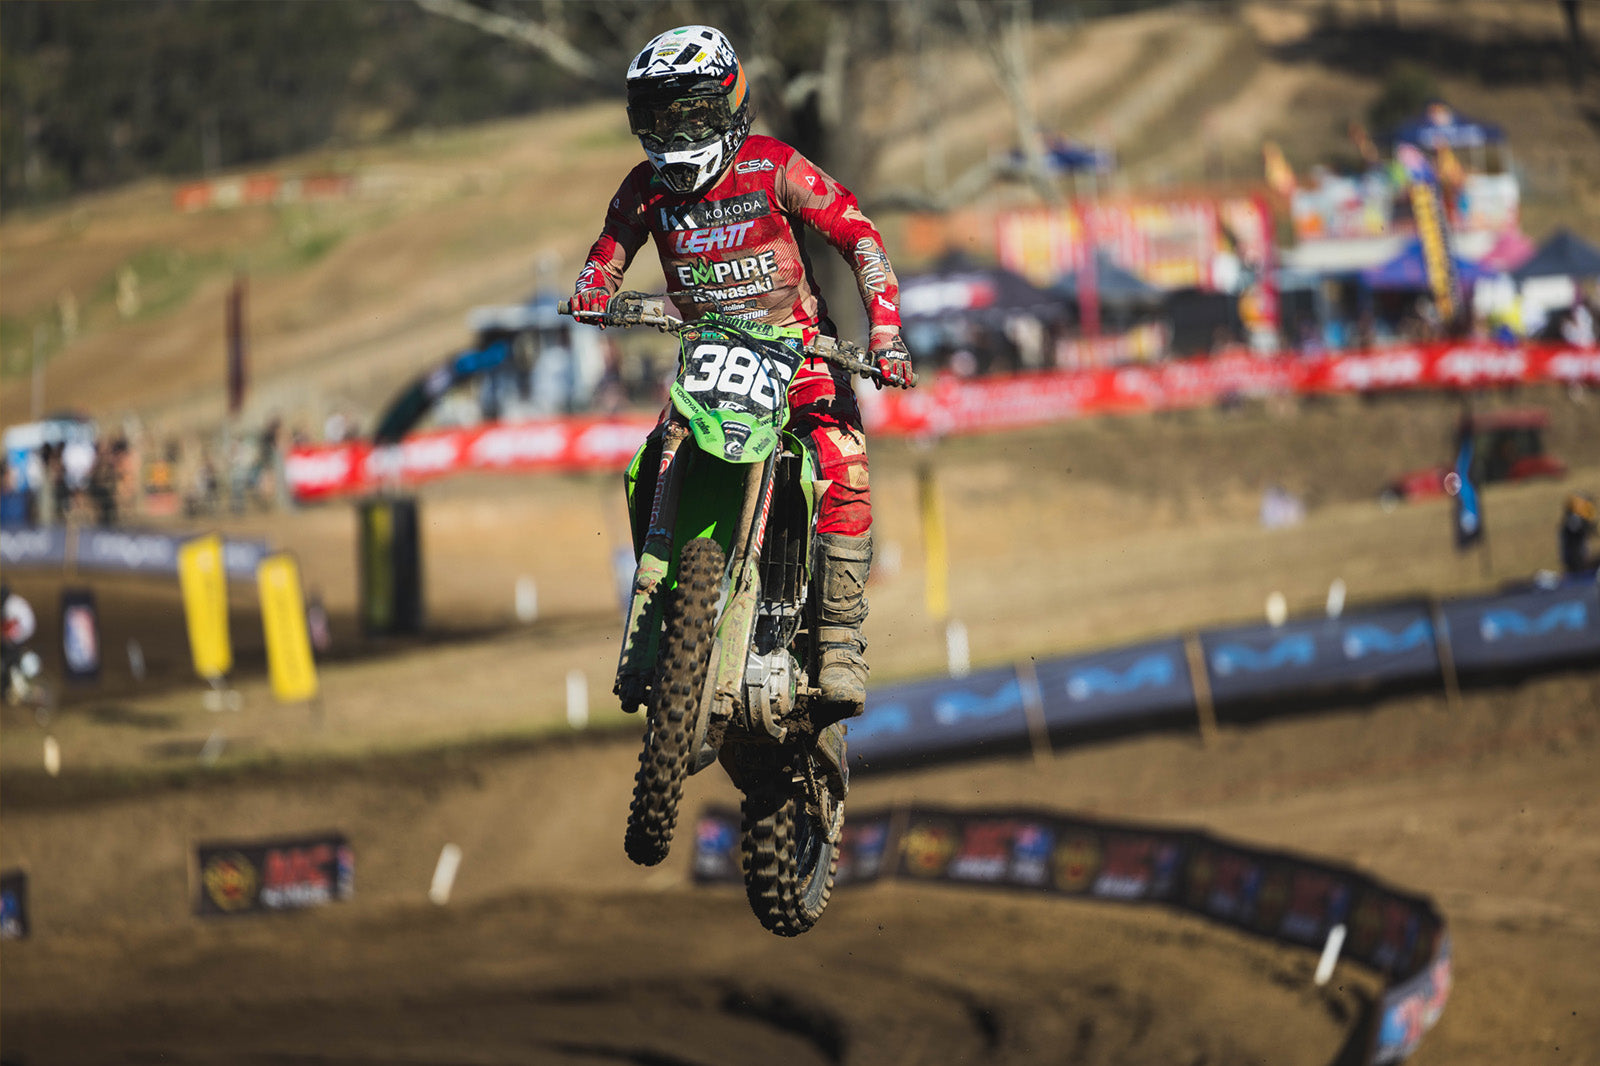 EMPIRE KAWASAKI ENDURES CHALLENGING DAY AT QUEENSLAND MOTO PARK ROUND OF PROMX